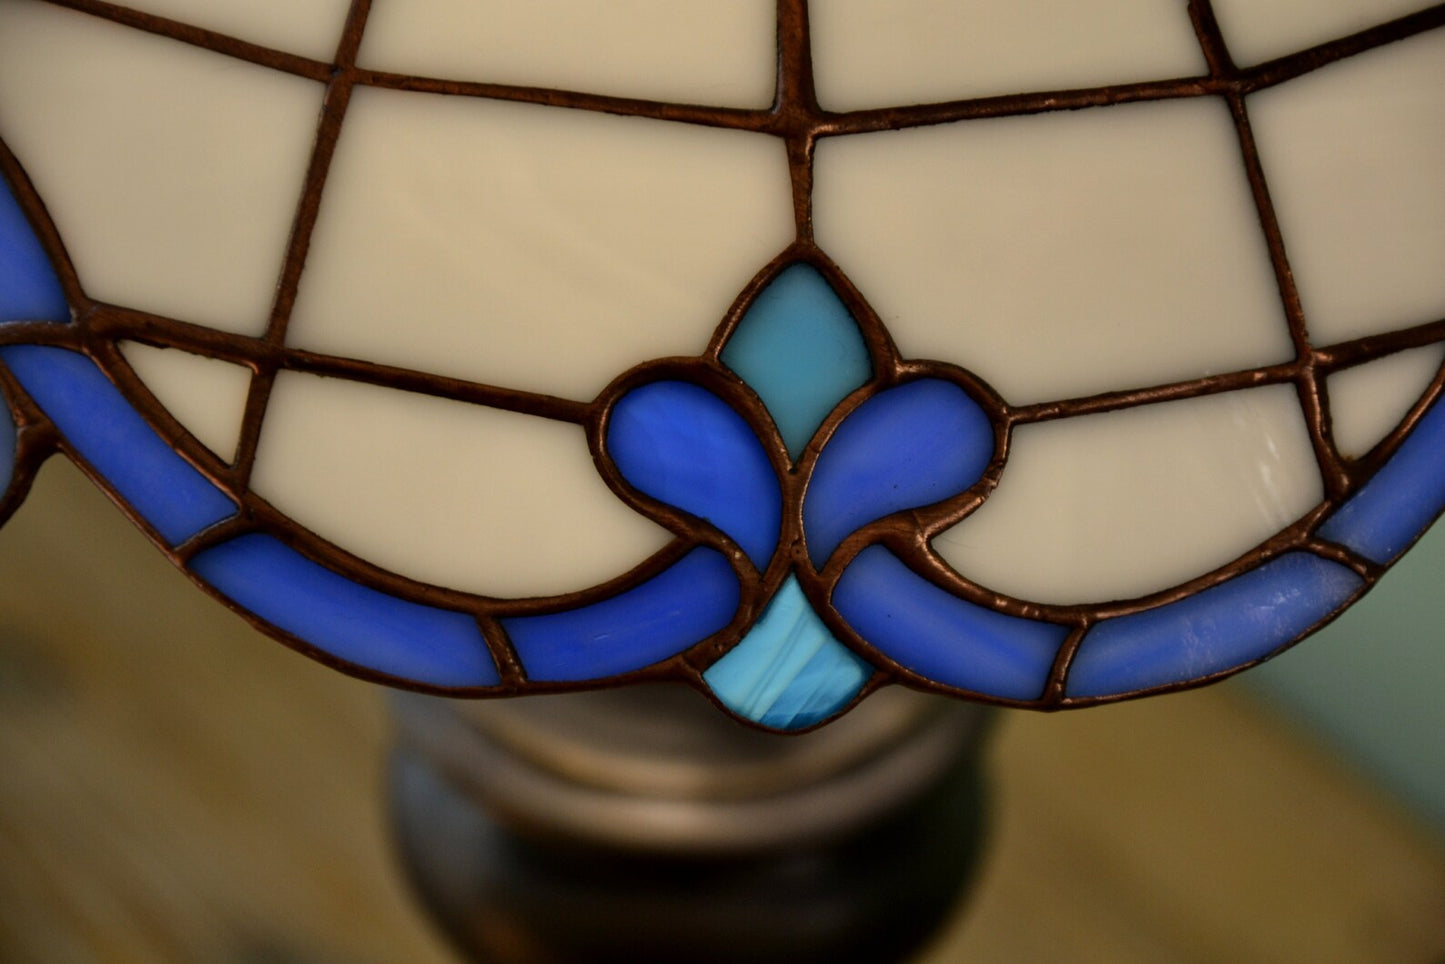 Stained glass table lamp Tiffany style Classic Tiffany design Desk lamp White & blue lamp Baroc pattern Mother's day gift Living room decor